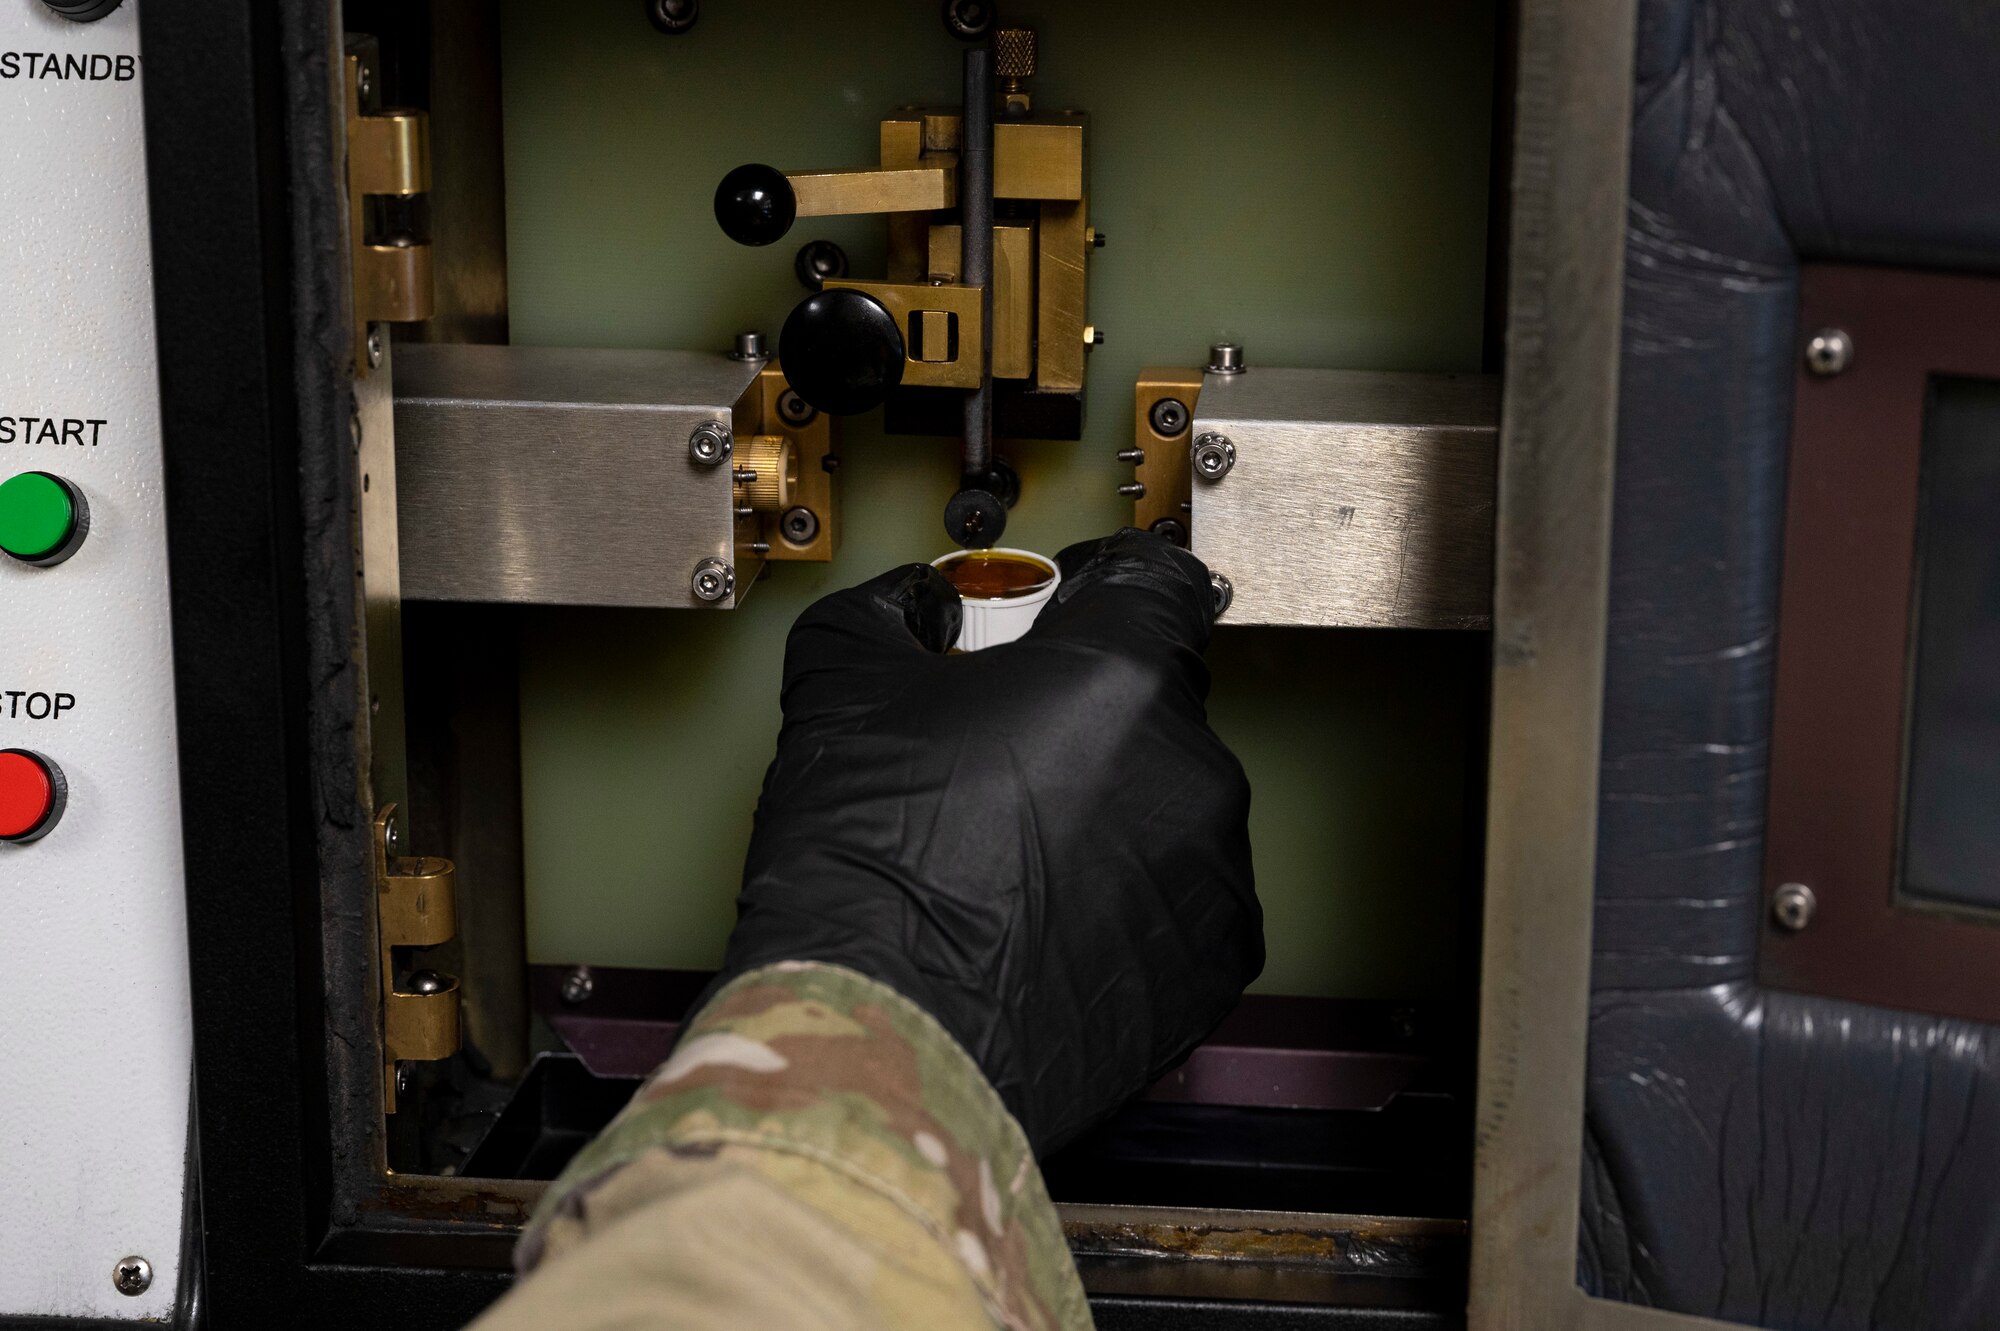 A hand with a black glove on it removes oil from a machine that can detect foreign objects that may be present in the oil.